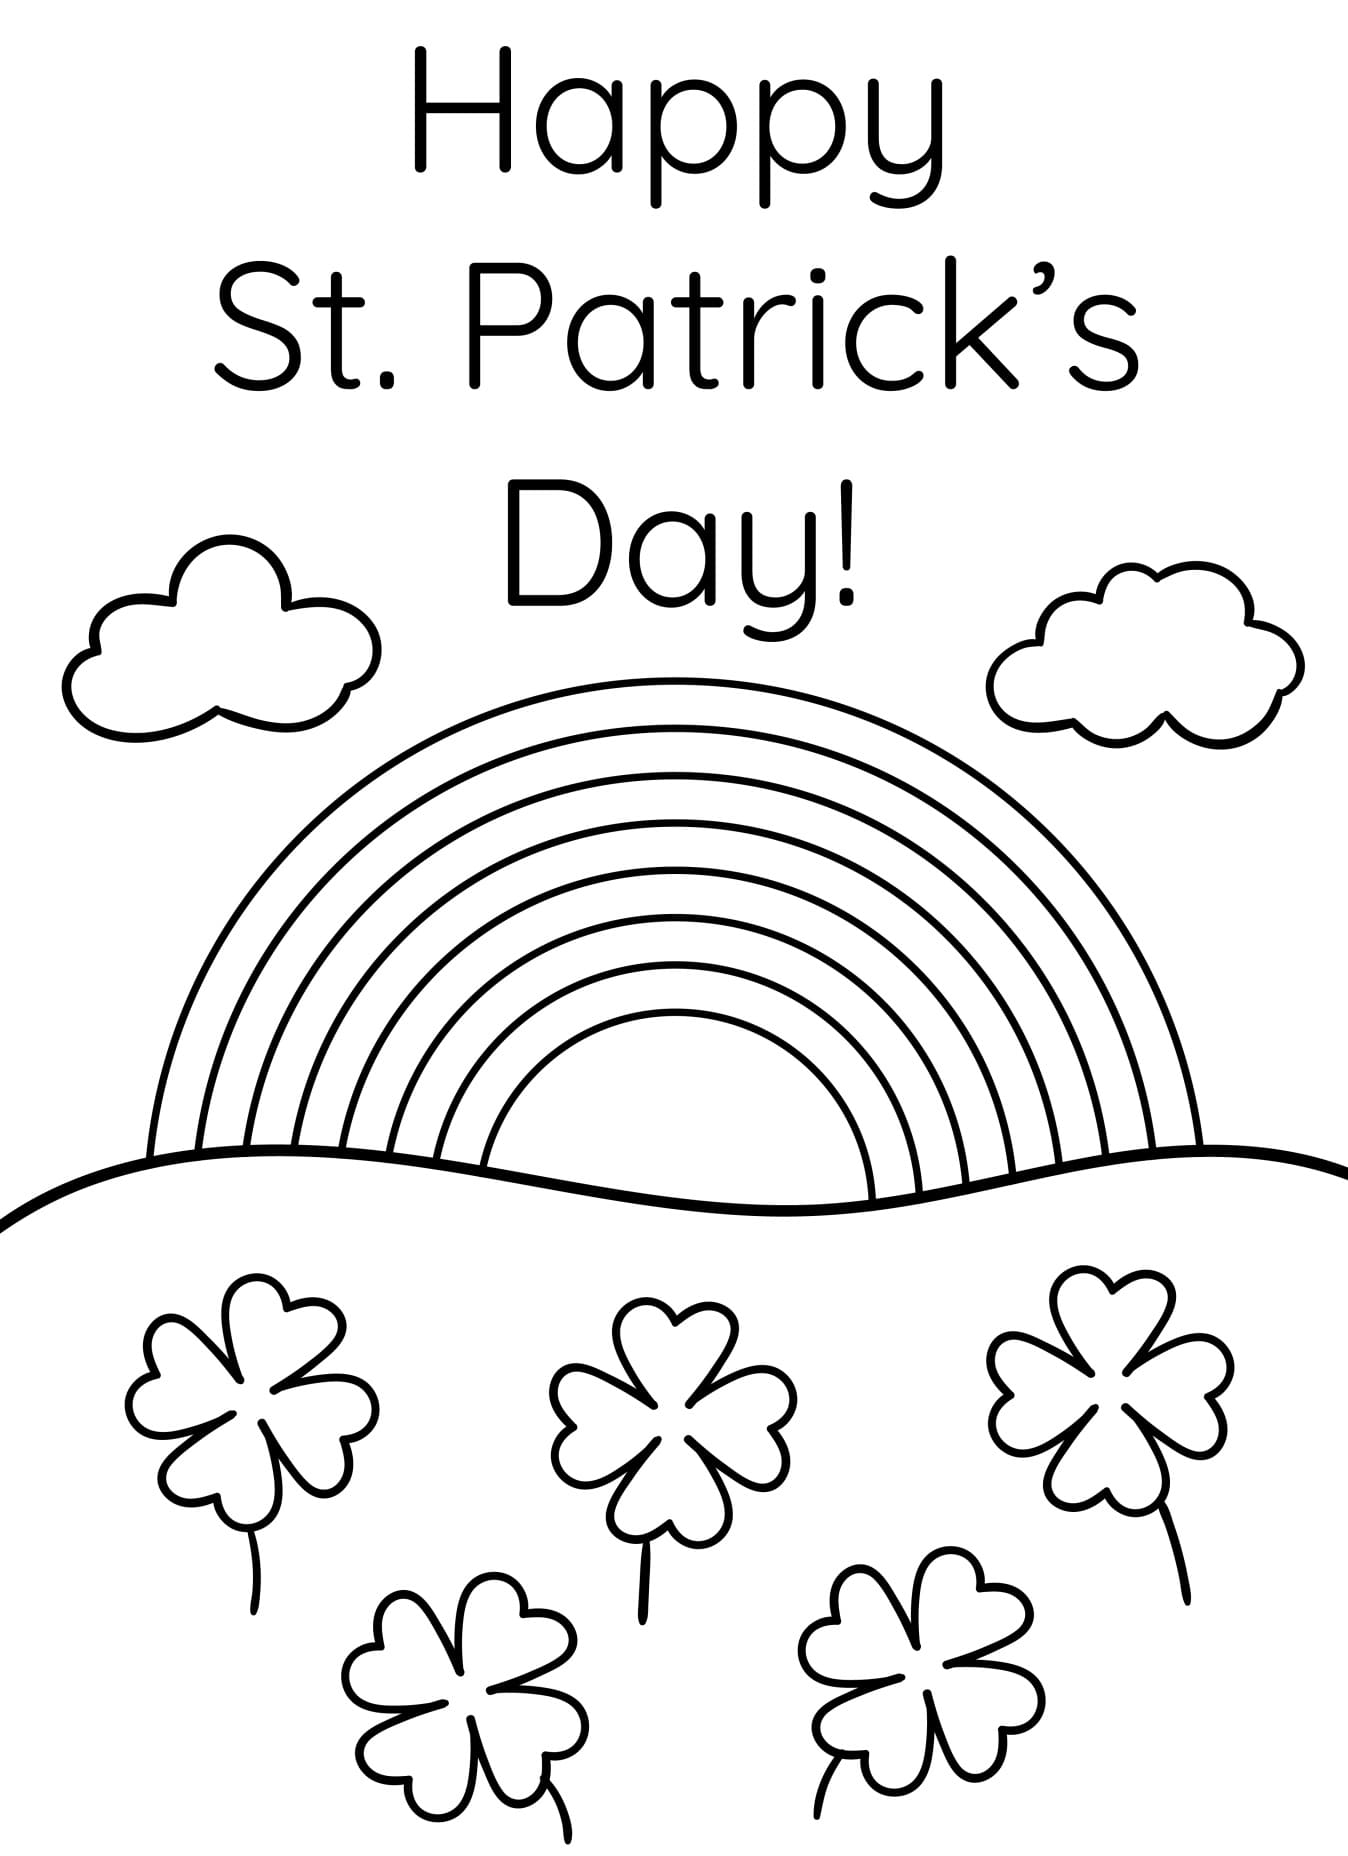 Free Printable Coloring Contest Page For St Patrick S Day